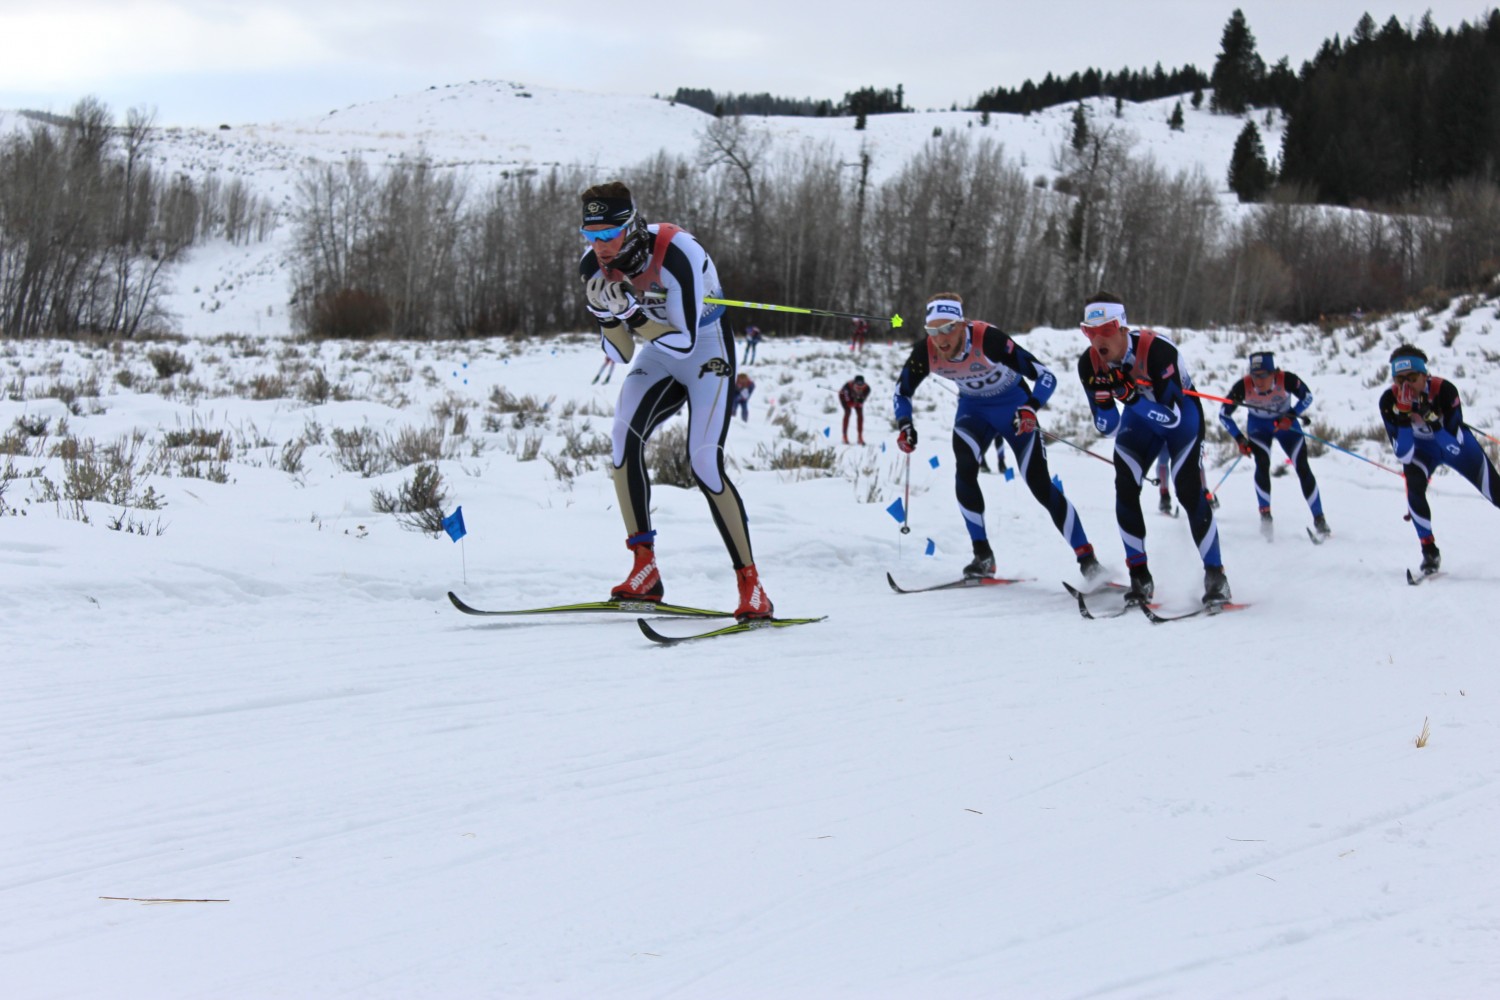 Left to right: Mads Strøm (University of Colorado Boulder) is trailed closely by Eric Packer (APU), David Norris (APU), Scott Patterson (APU) and Lex Treinen (APU) during the men's SuperTour 15 k classic mass start on Sunday in Sun Valley, Idaho.